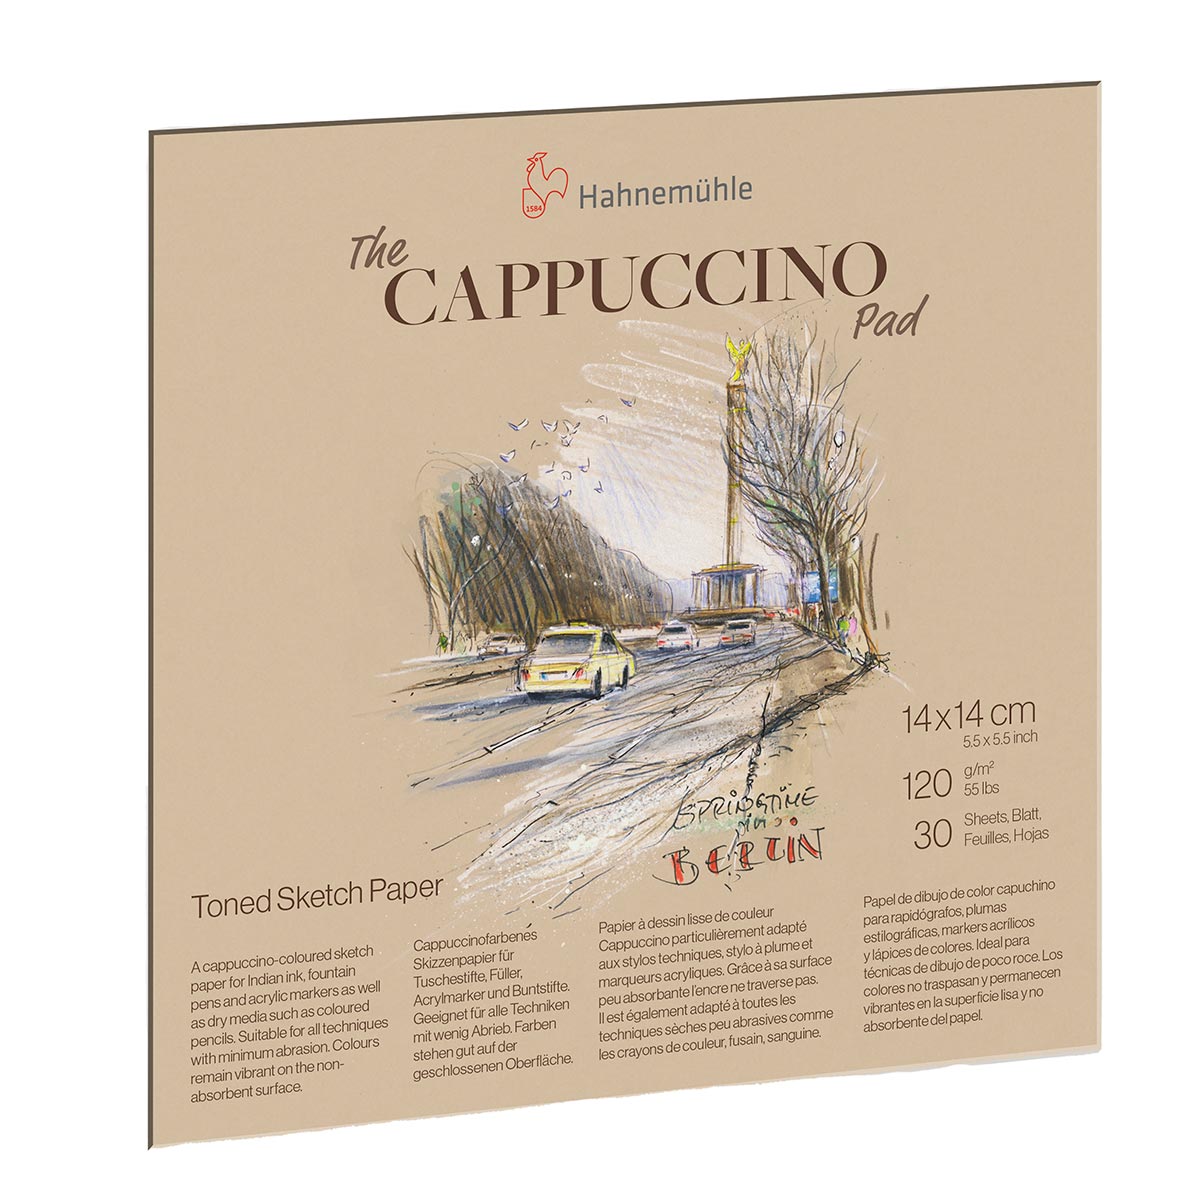 Hahnemuhle - Cappuccino Paper Sketch Pad 14x14cm